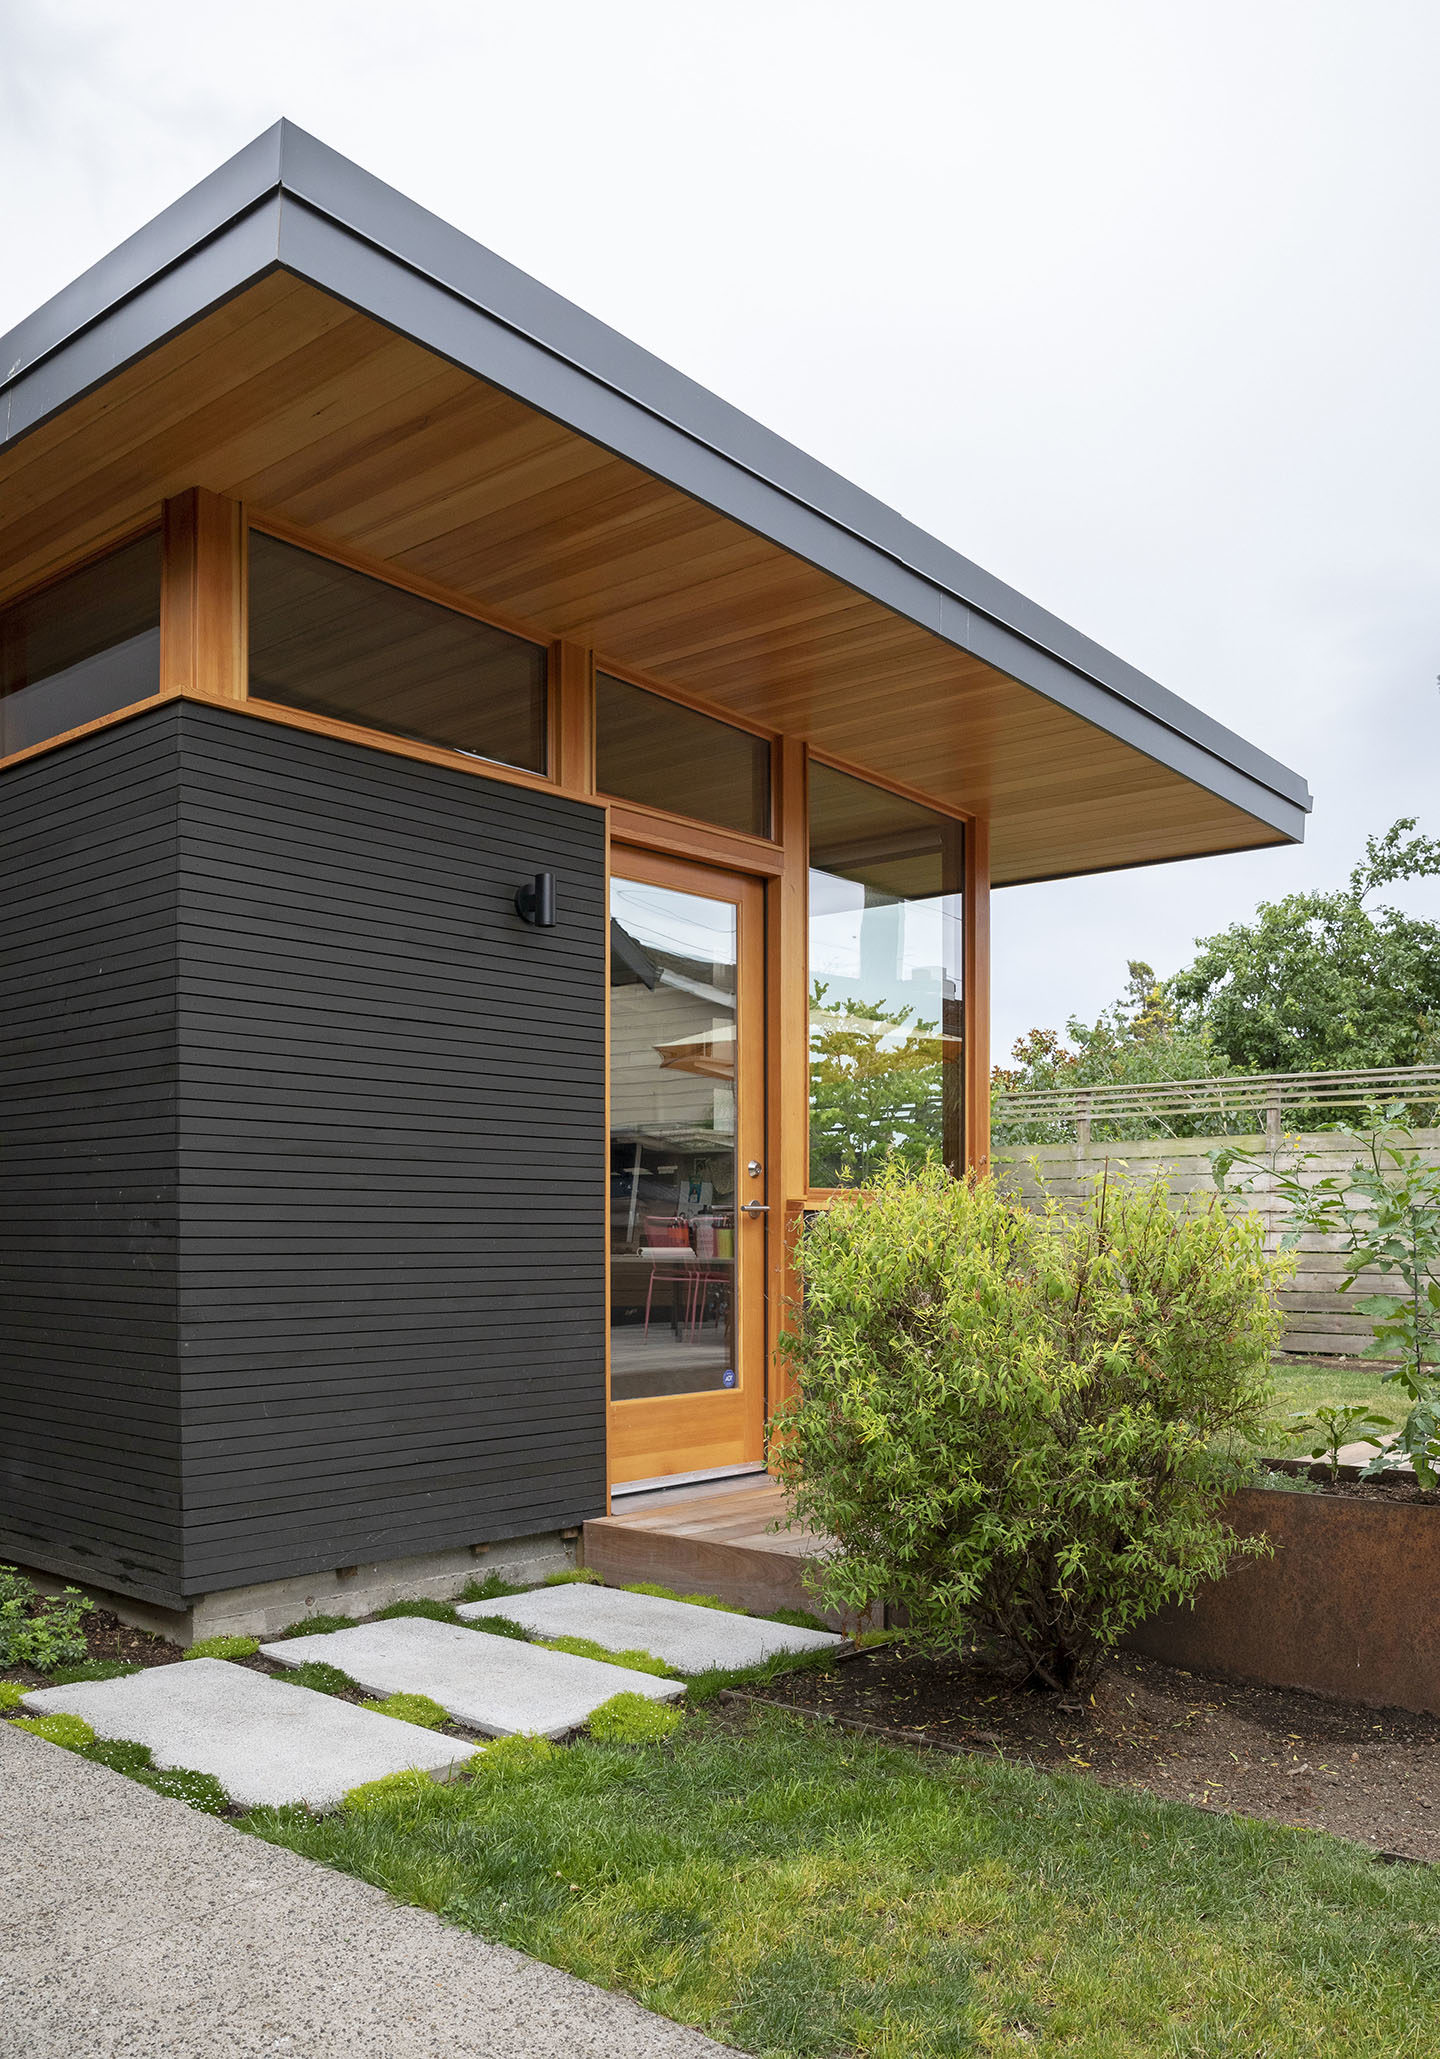 Exterior view of Studio Zerbey modern home office space